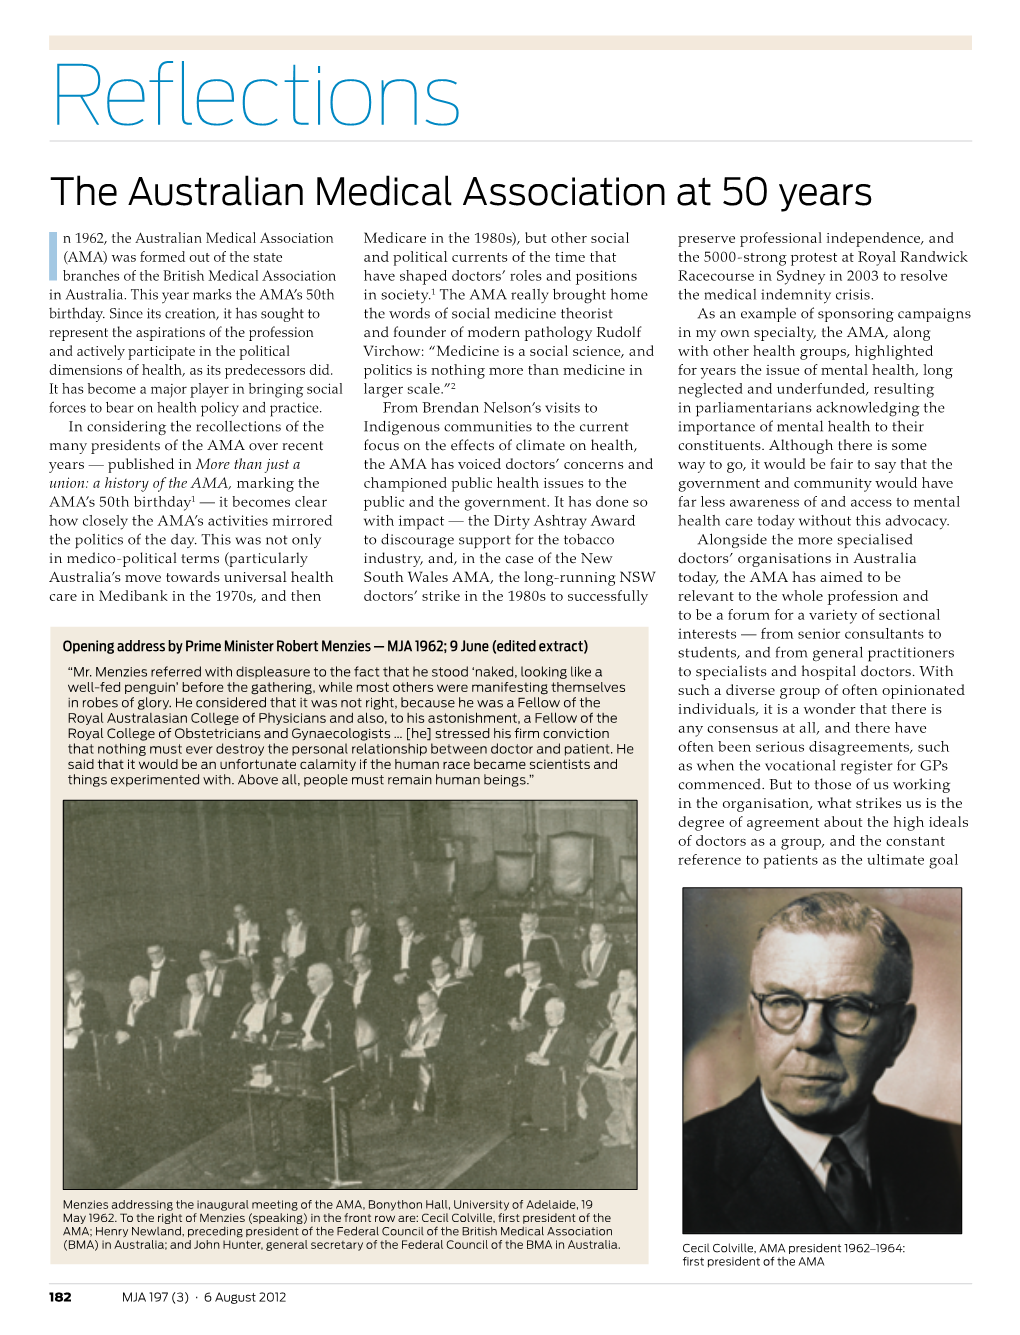 Reflections the Australian Medical Association at 50 Years